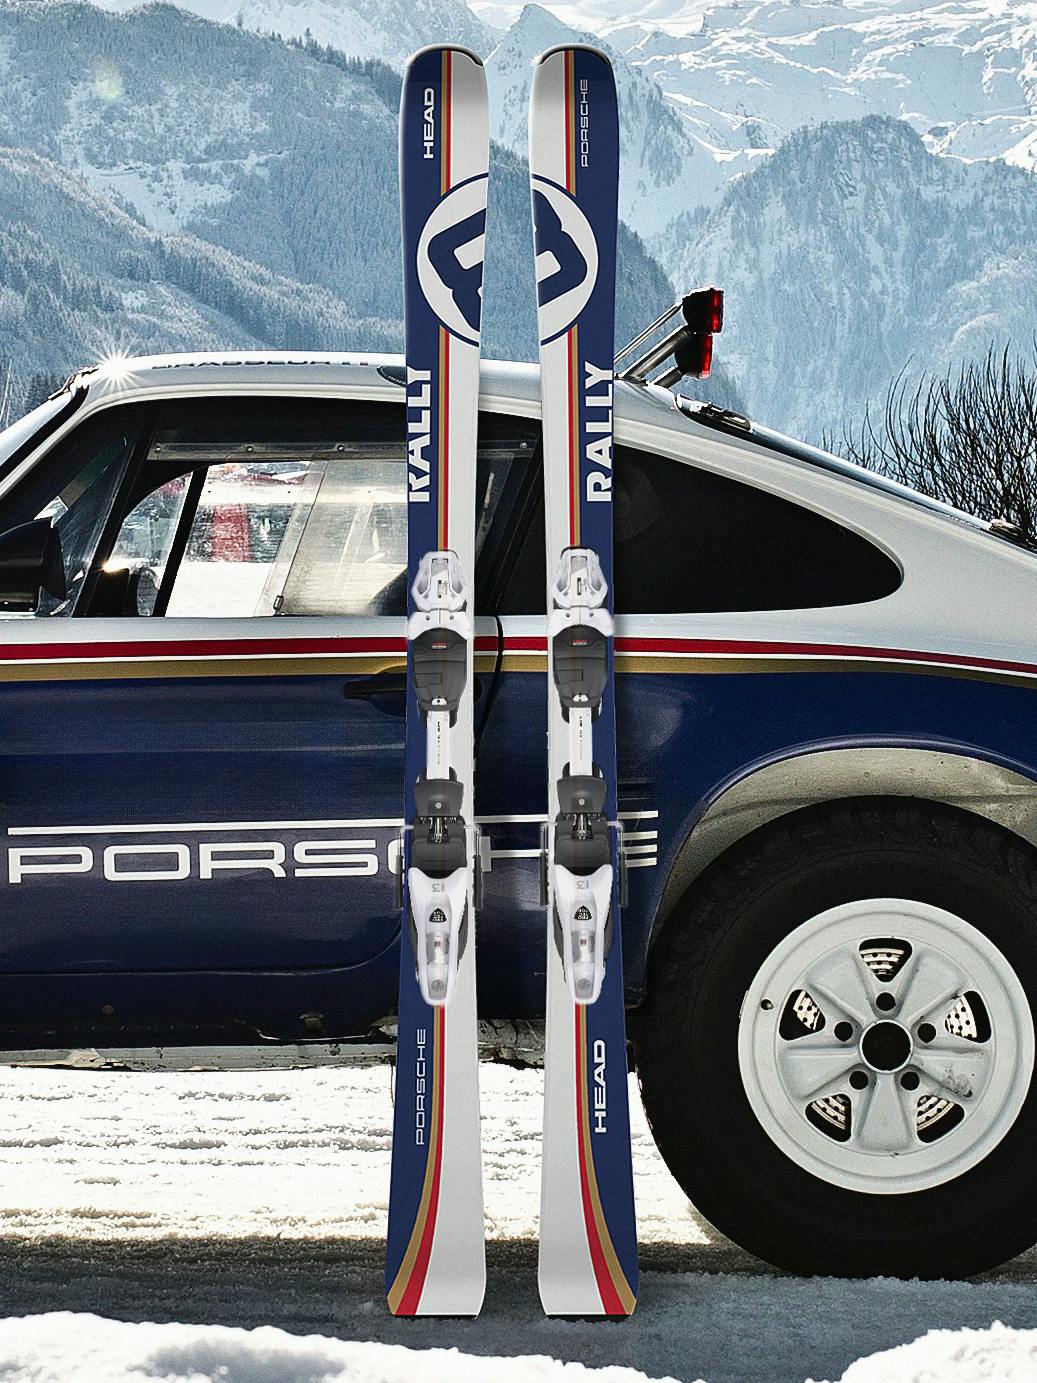 A pair of new Porsche HEAD Ski 8 Series Rally Skis pictured leaning against the side of a Porsche 911 in Rally livery, with mountains in the background.